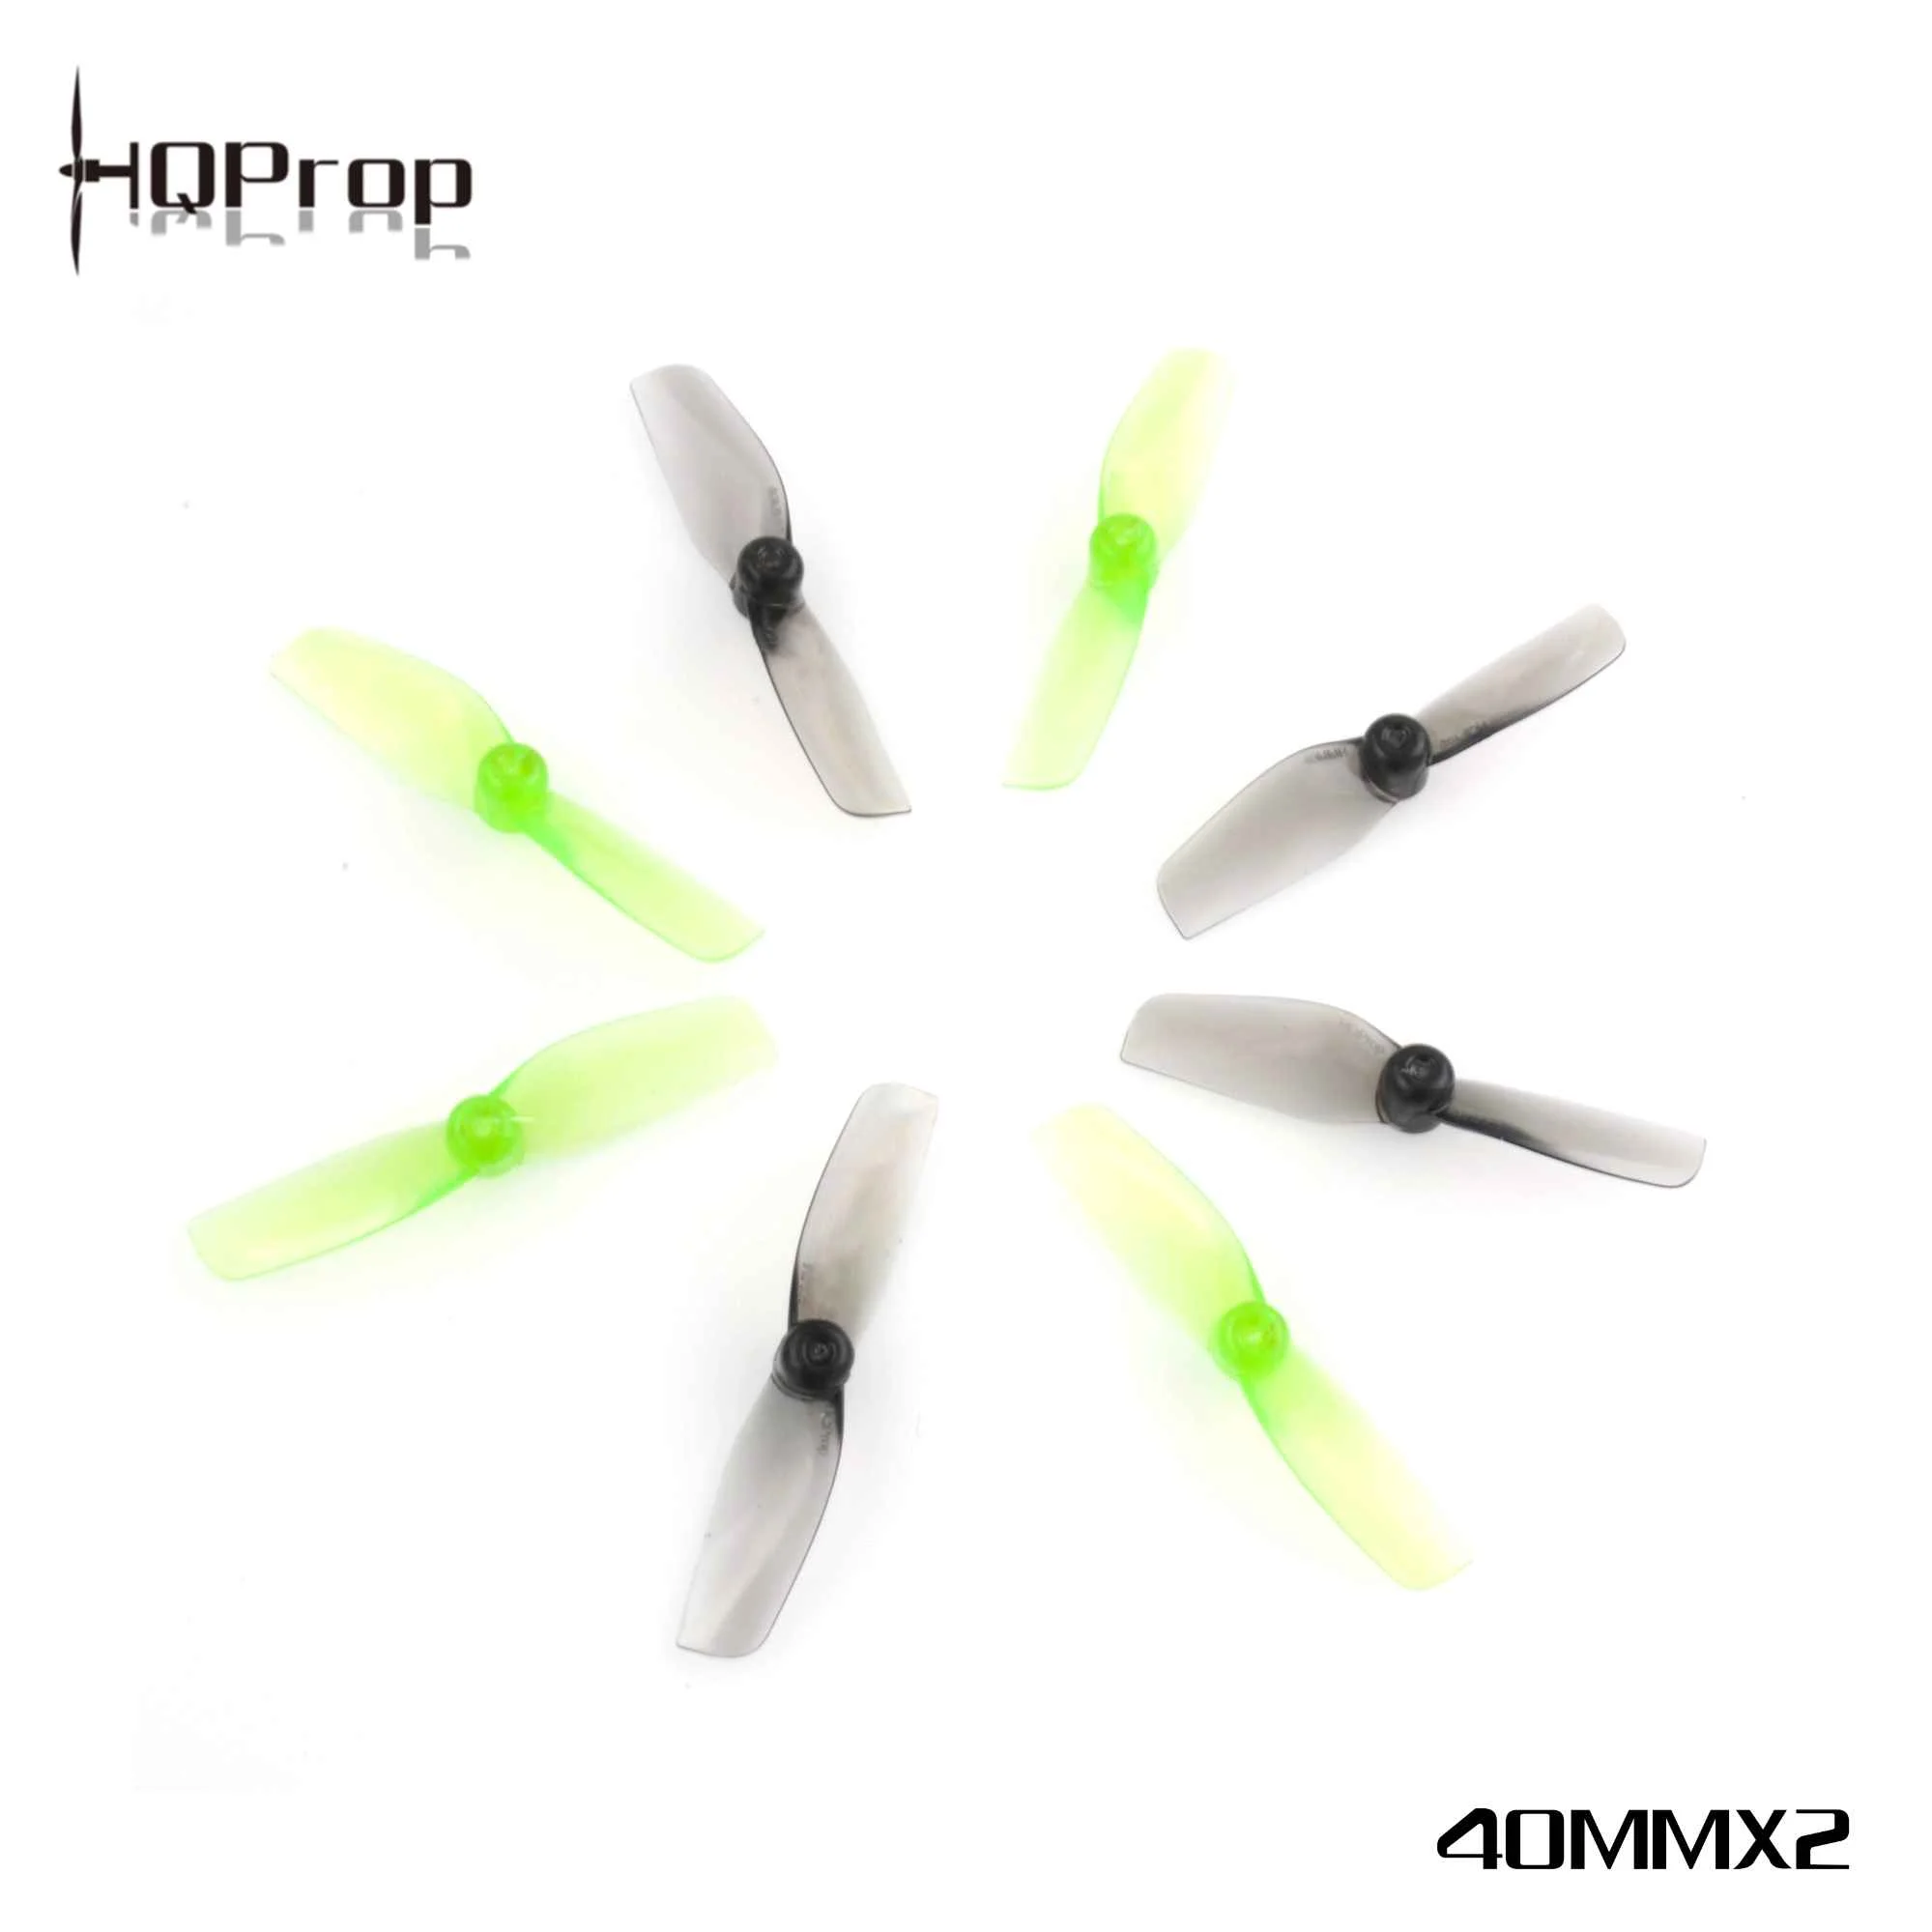 HQProp Micro Whoop 40MMx2 Mix color 1mm shaft